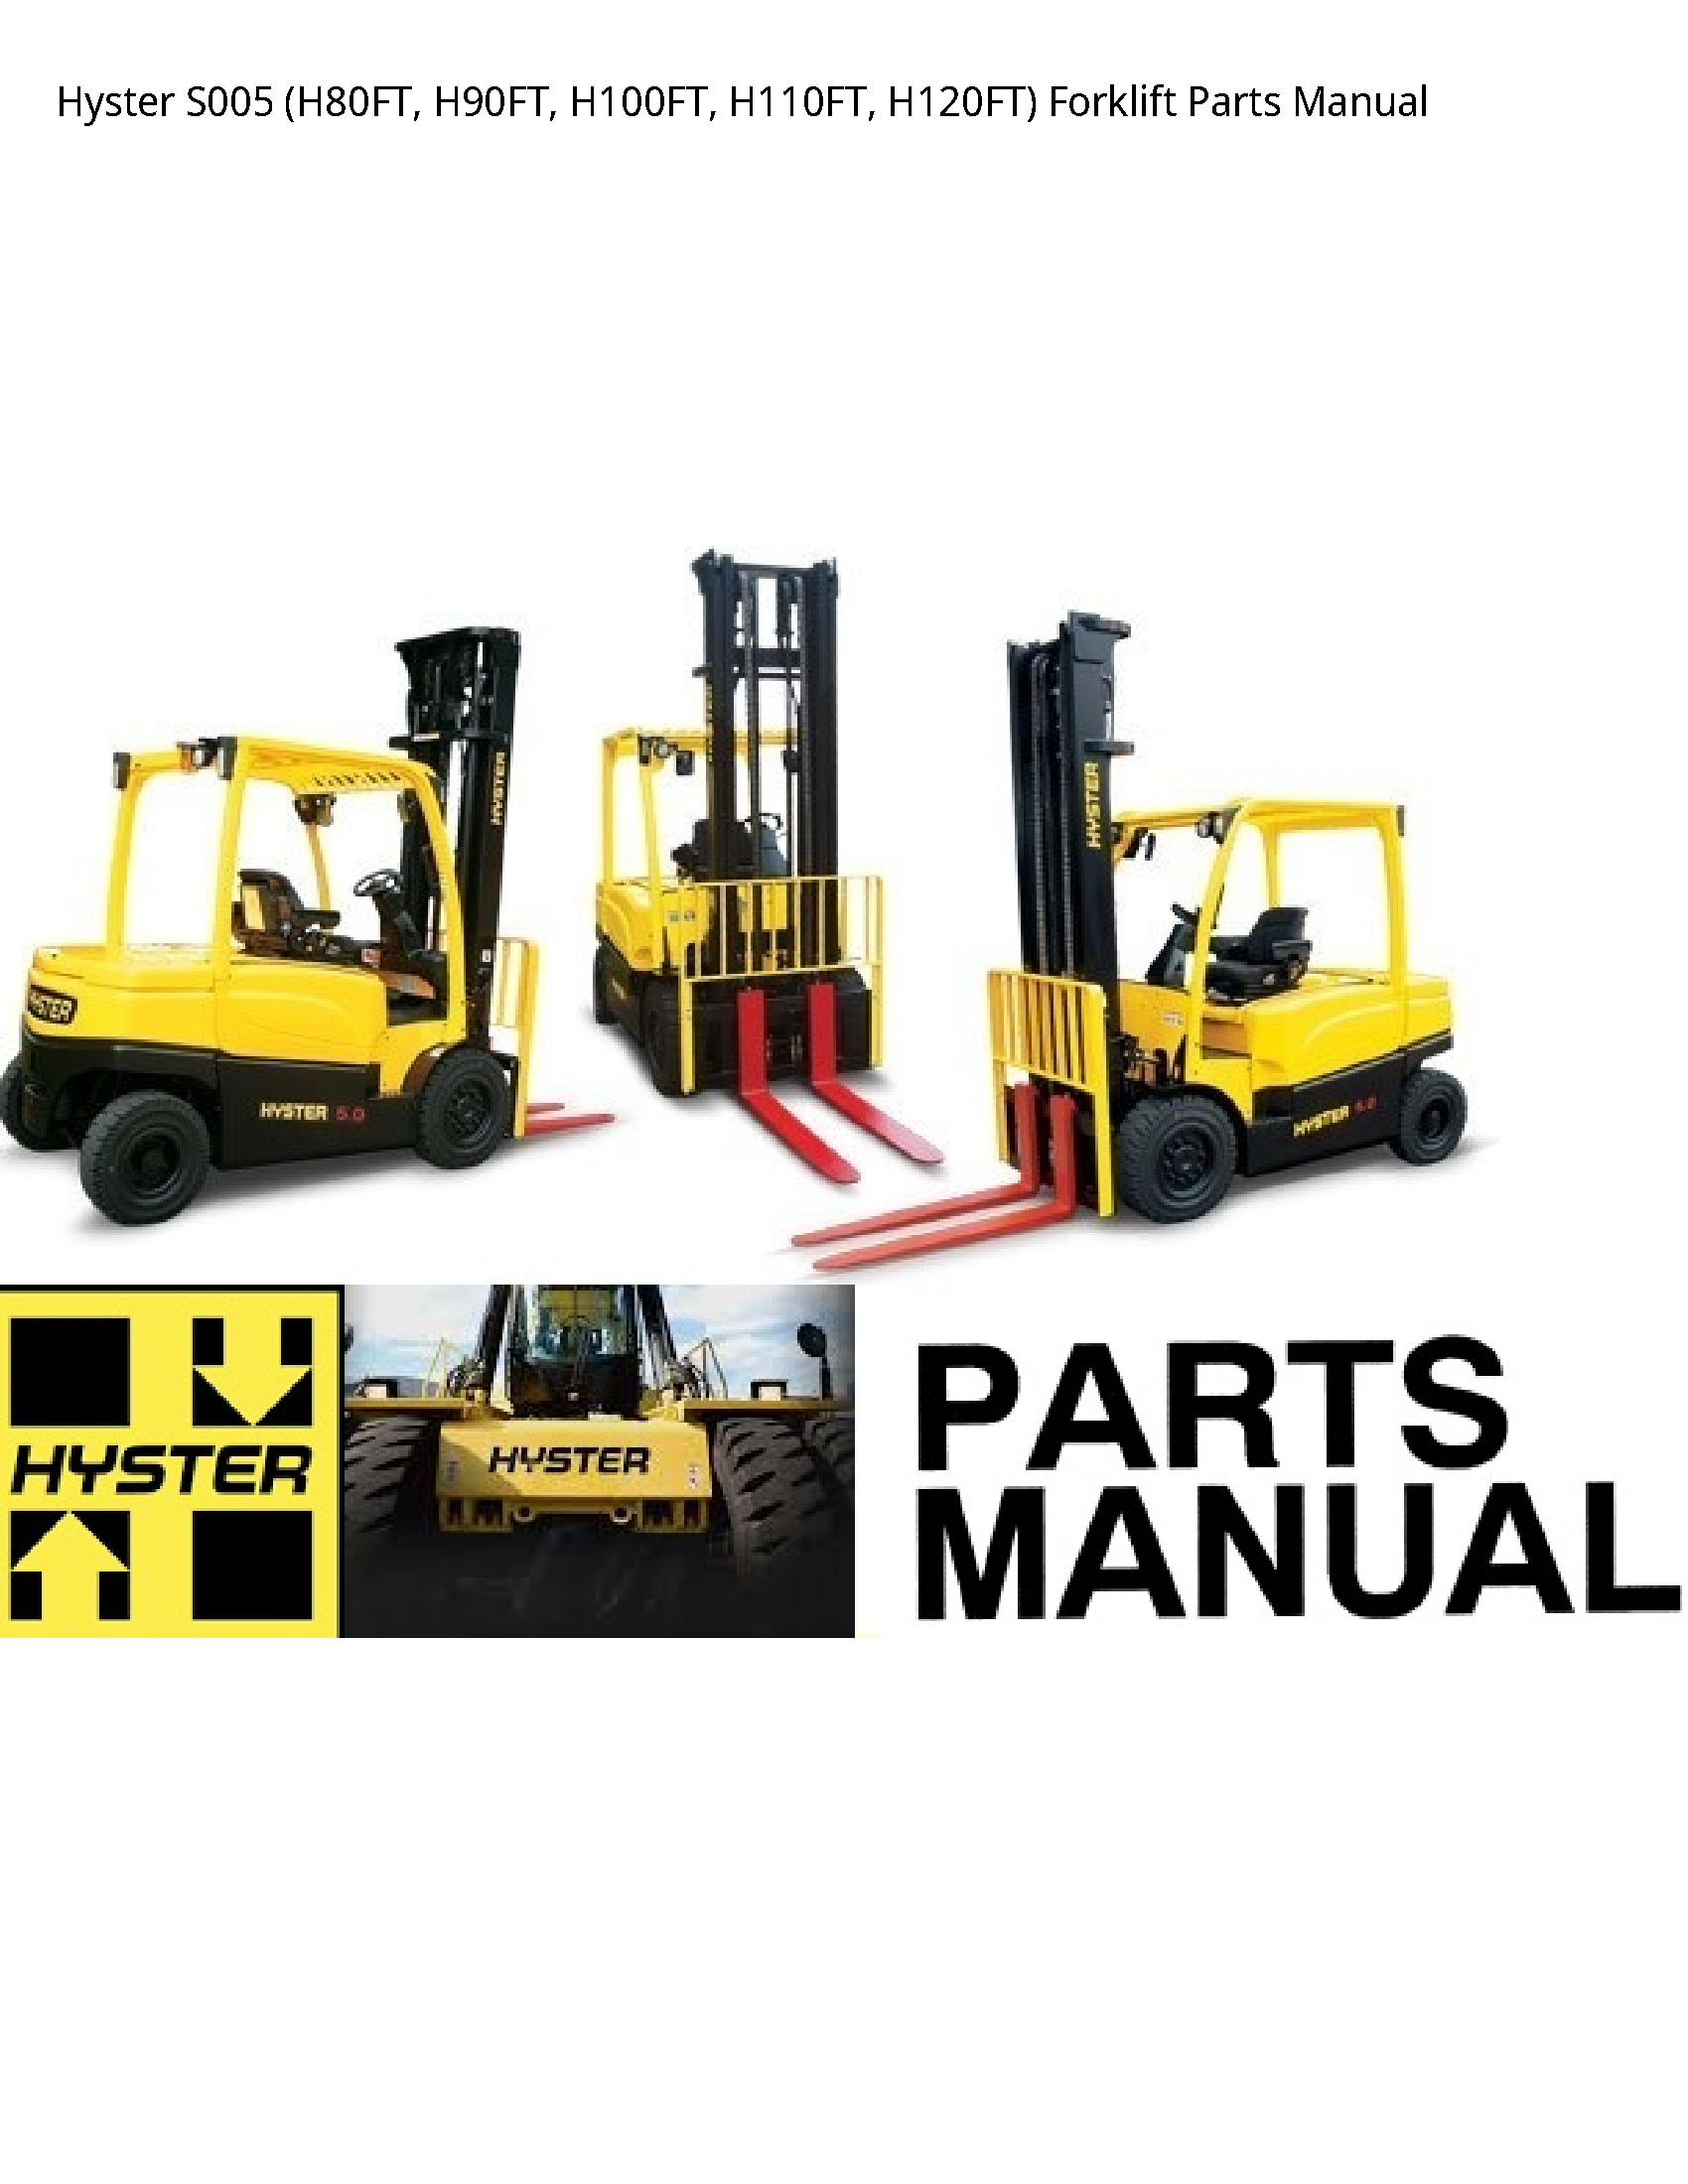 Hyster S005 Forklift Parts manual